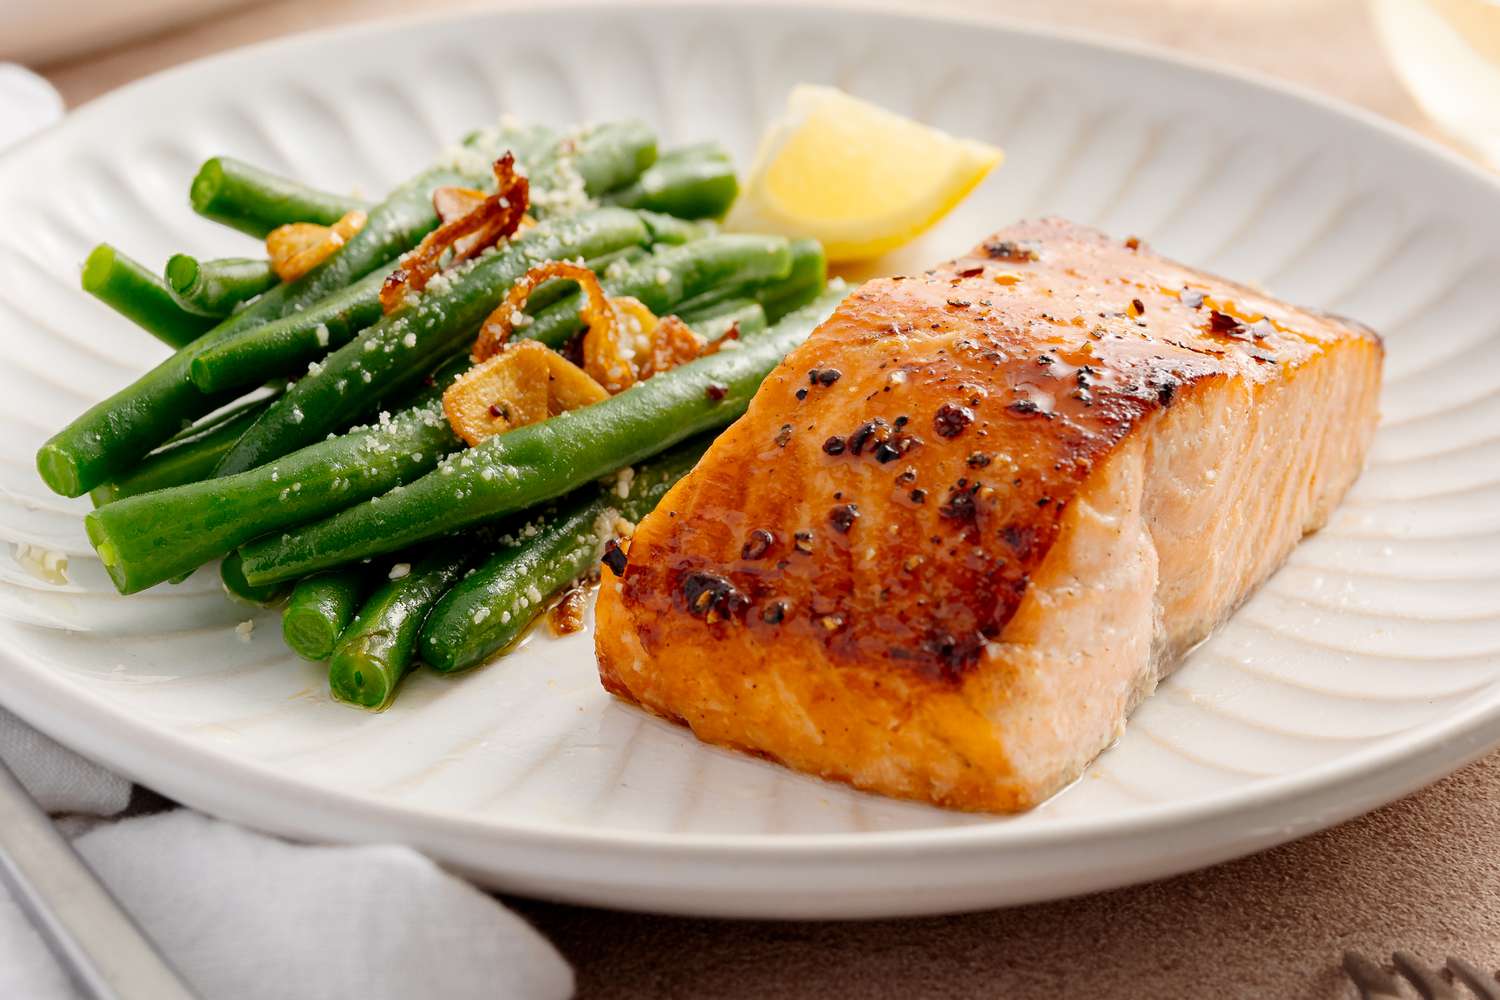 Plate of Salmon with Brown Sugar Glaze and a Side of Green Beans